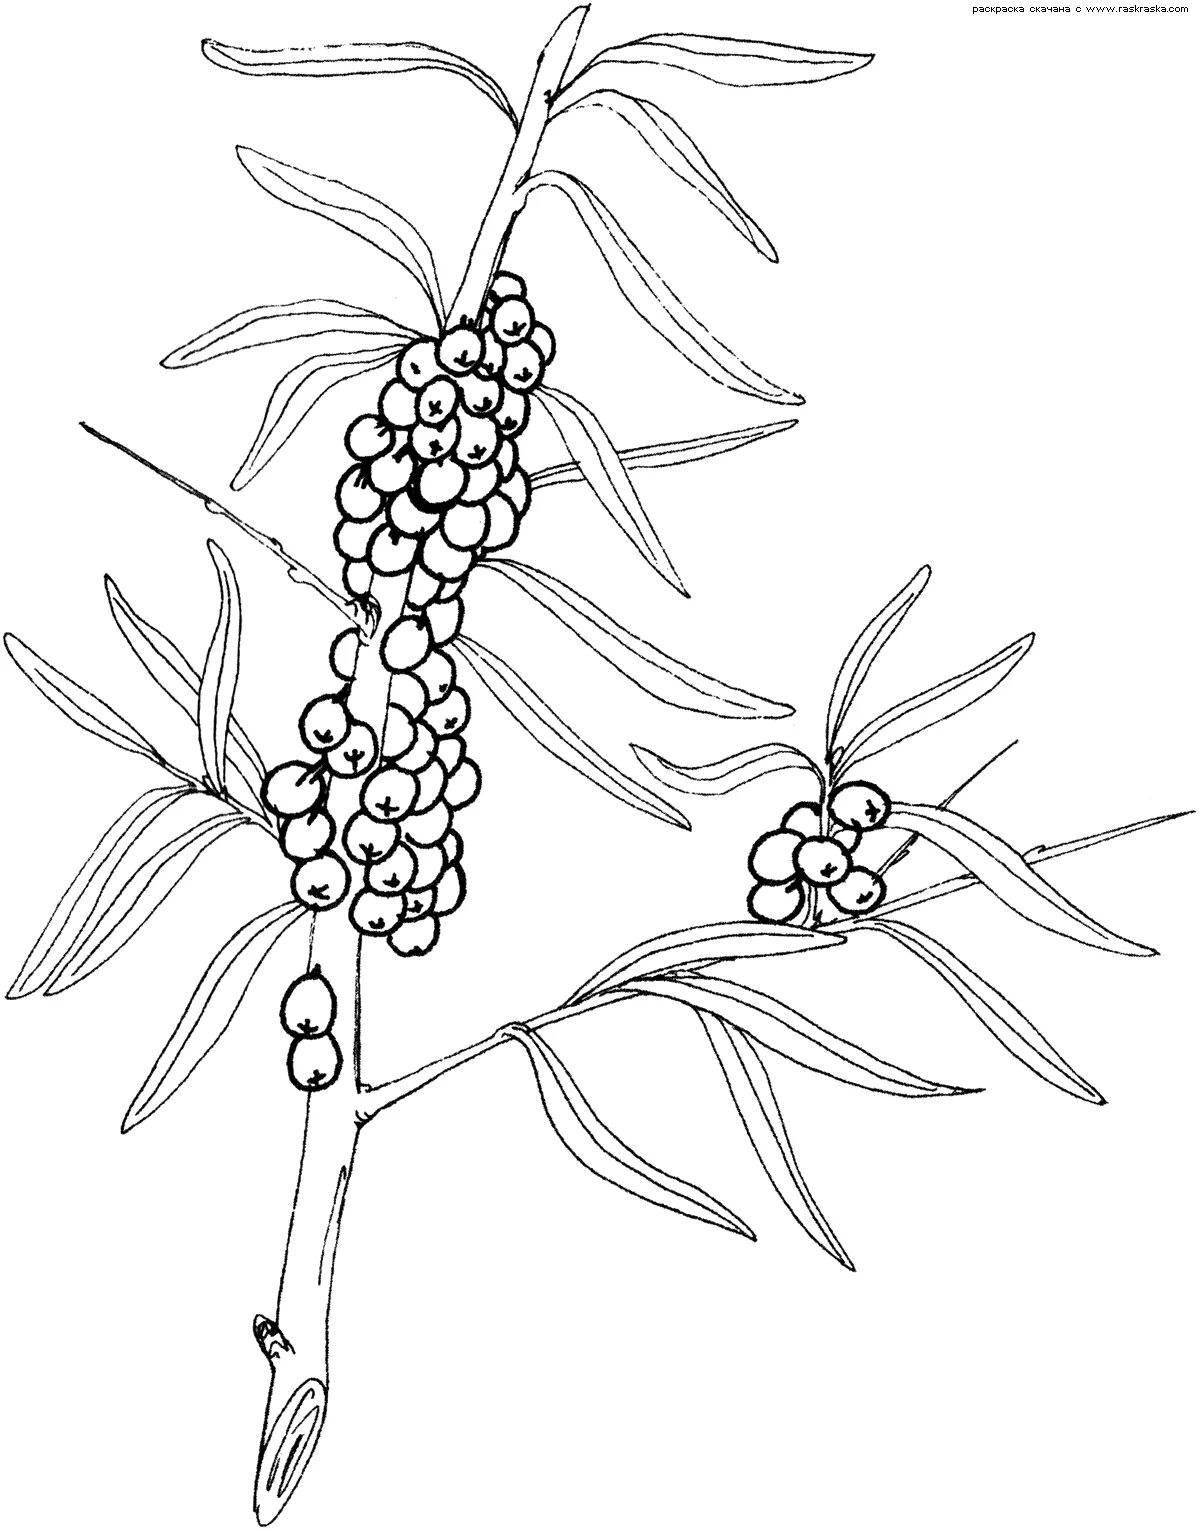 Amazing poisonous plants coloring pages for kids